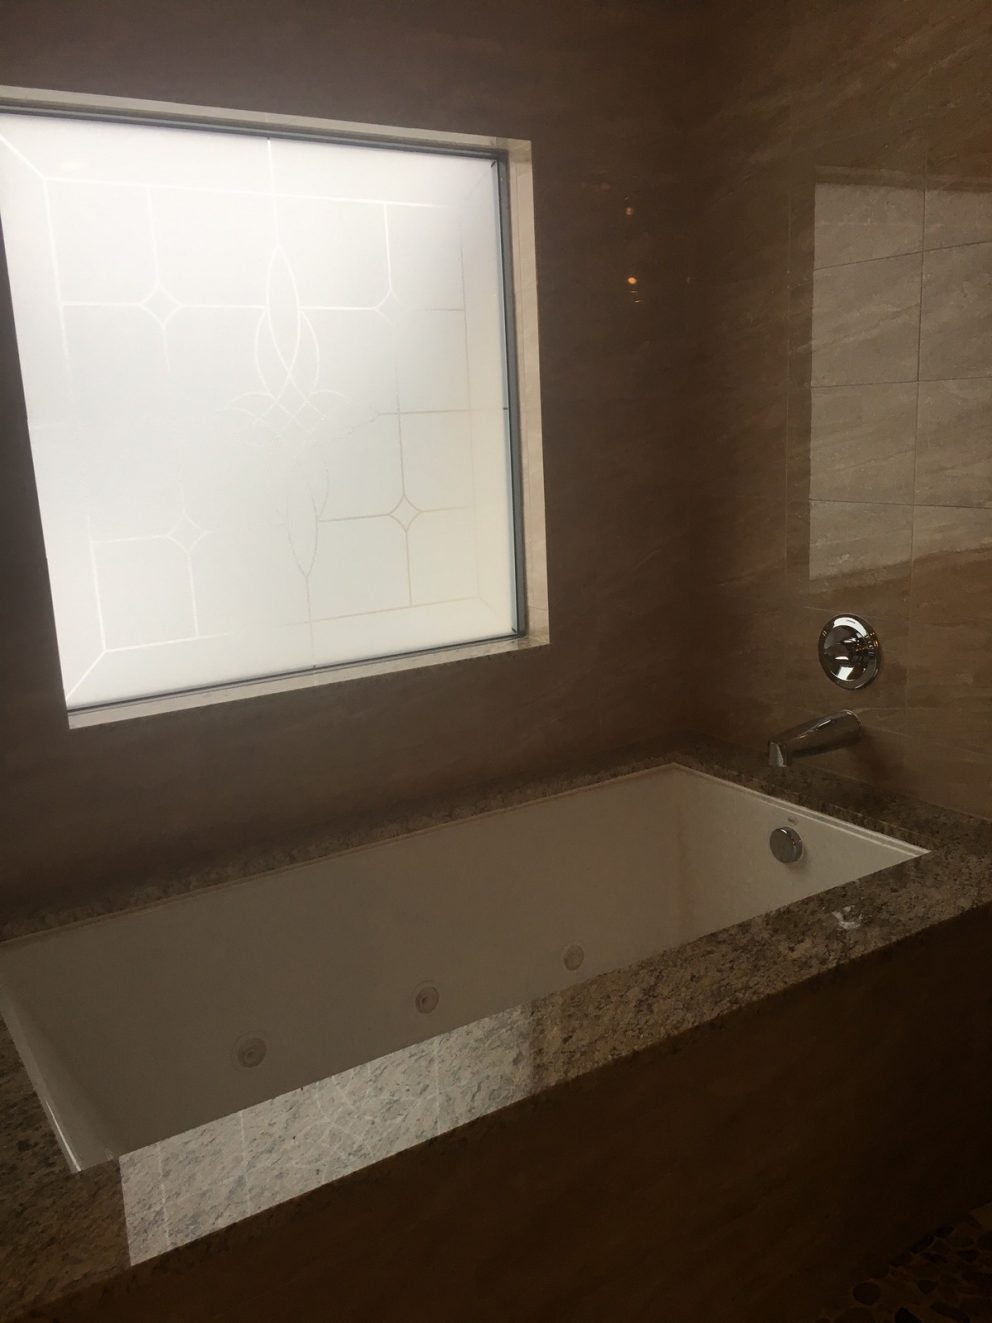 Undermount bathtub in master bath with frosted glass window